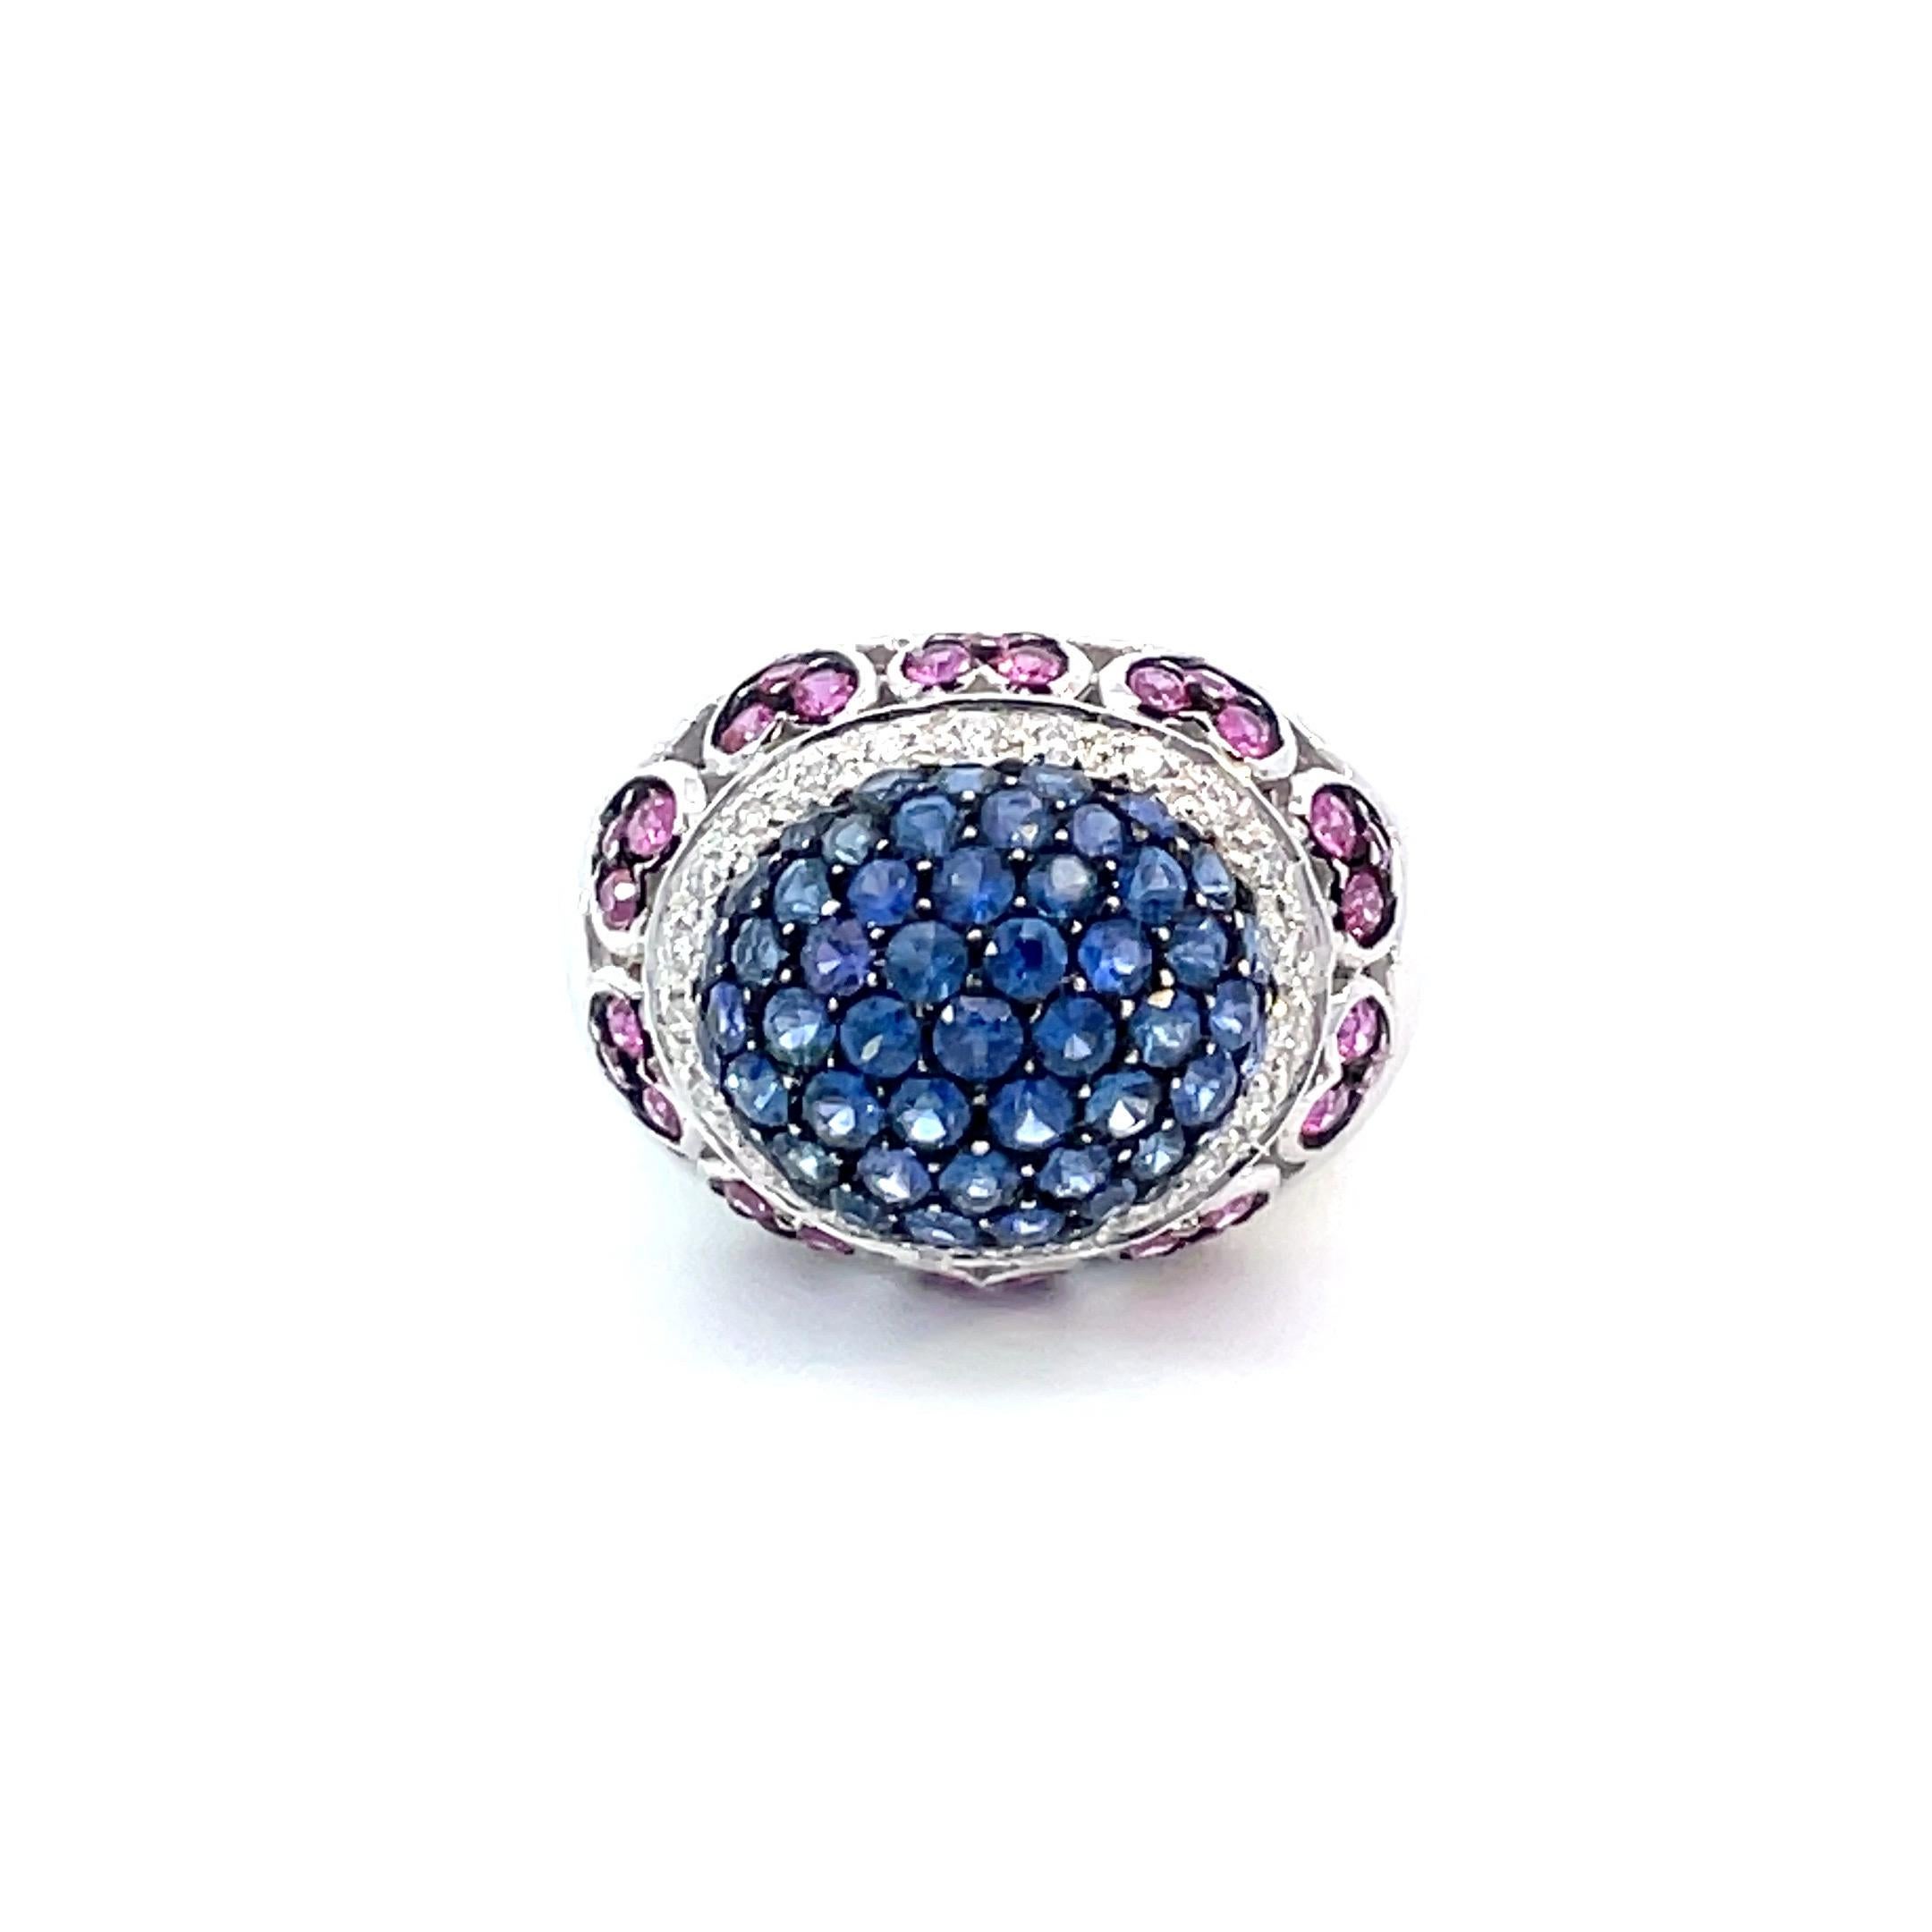 One dome ring set in centre with natural blue sapphires with a black rhodium finish surrounded by a row of brilliant cut white diamonds and below that a row of heart motif set with natural pink sapphires with a black rhodium finish in 18kt white